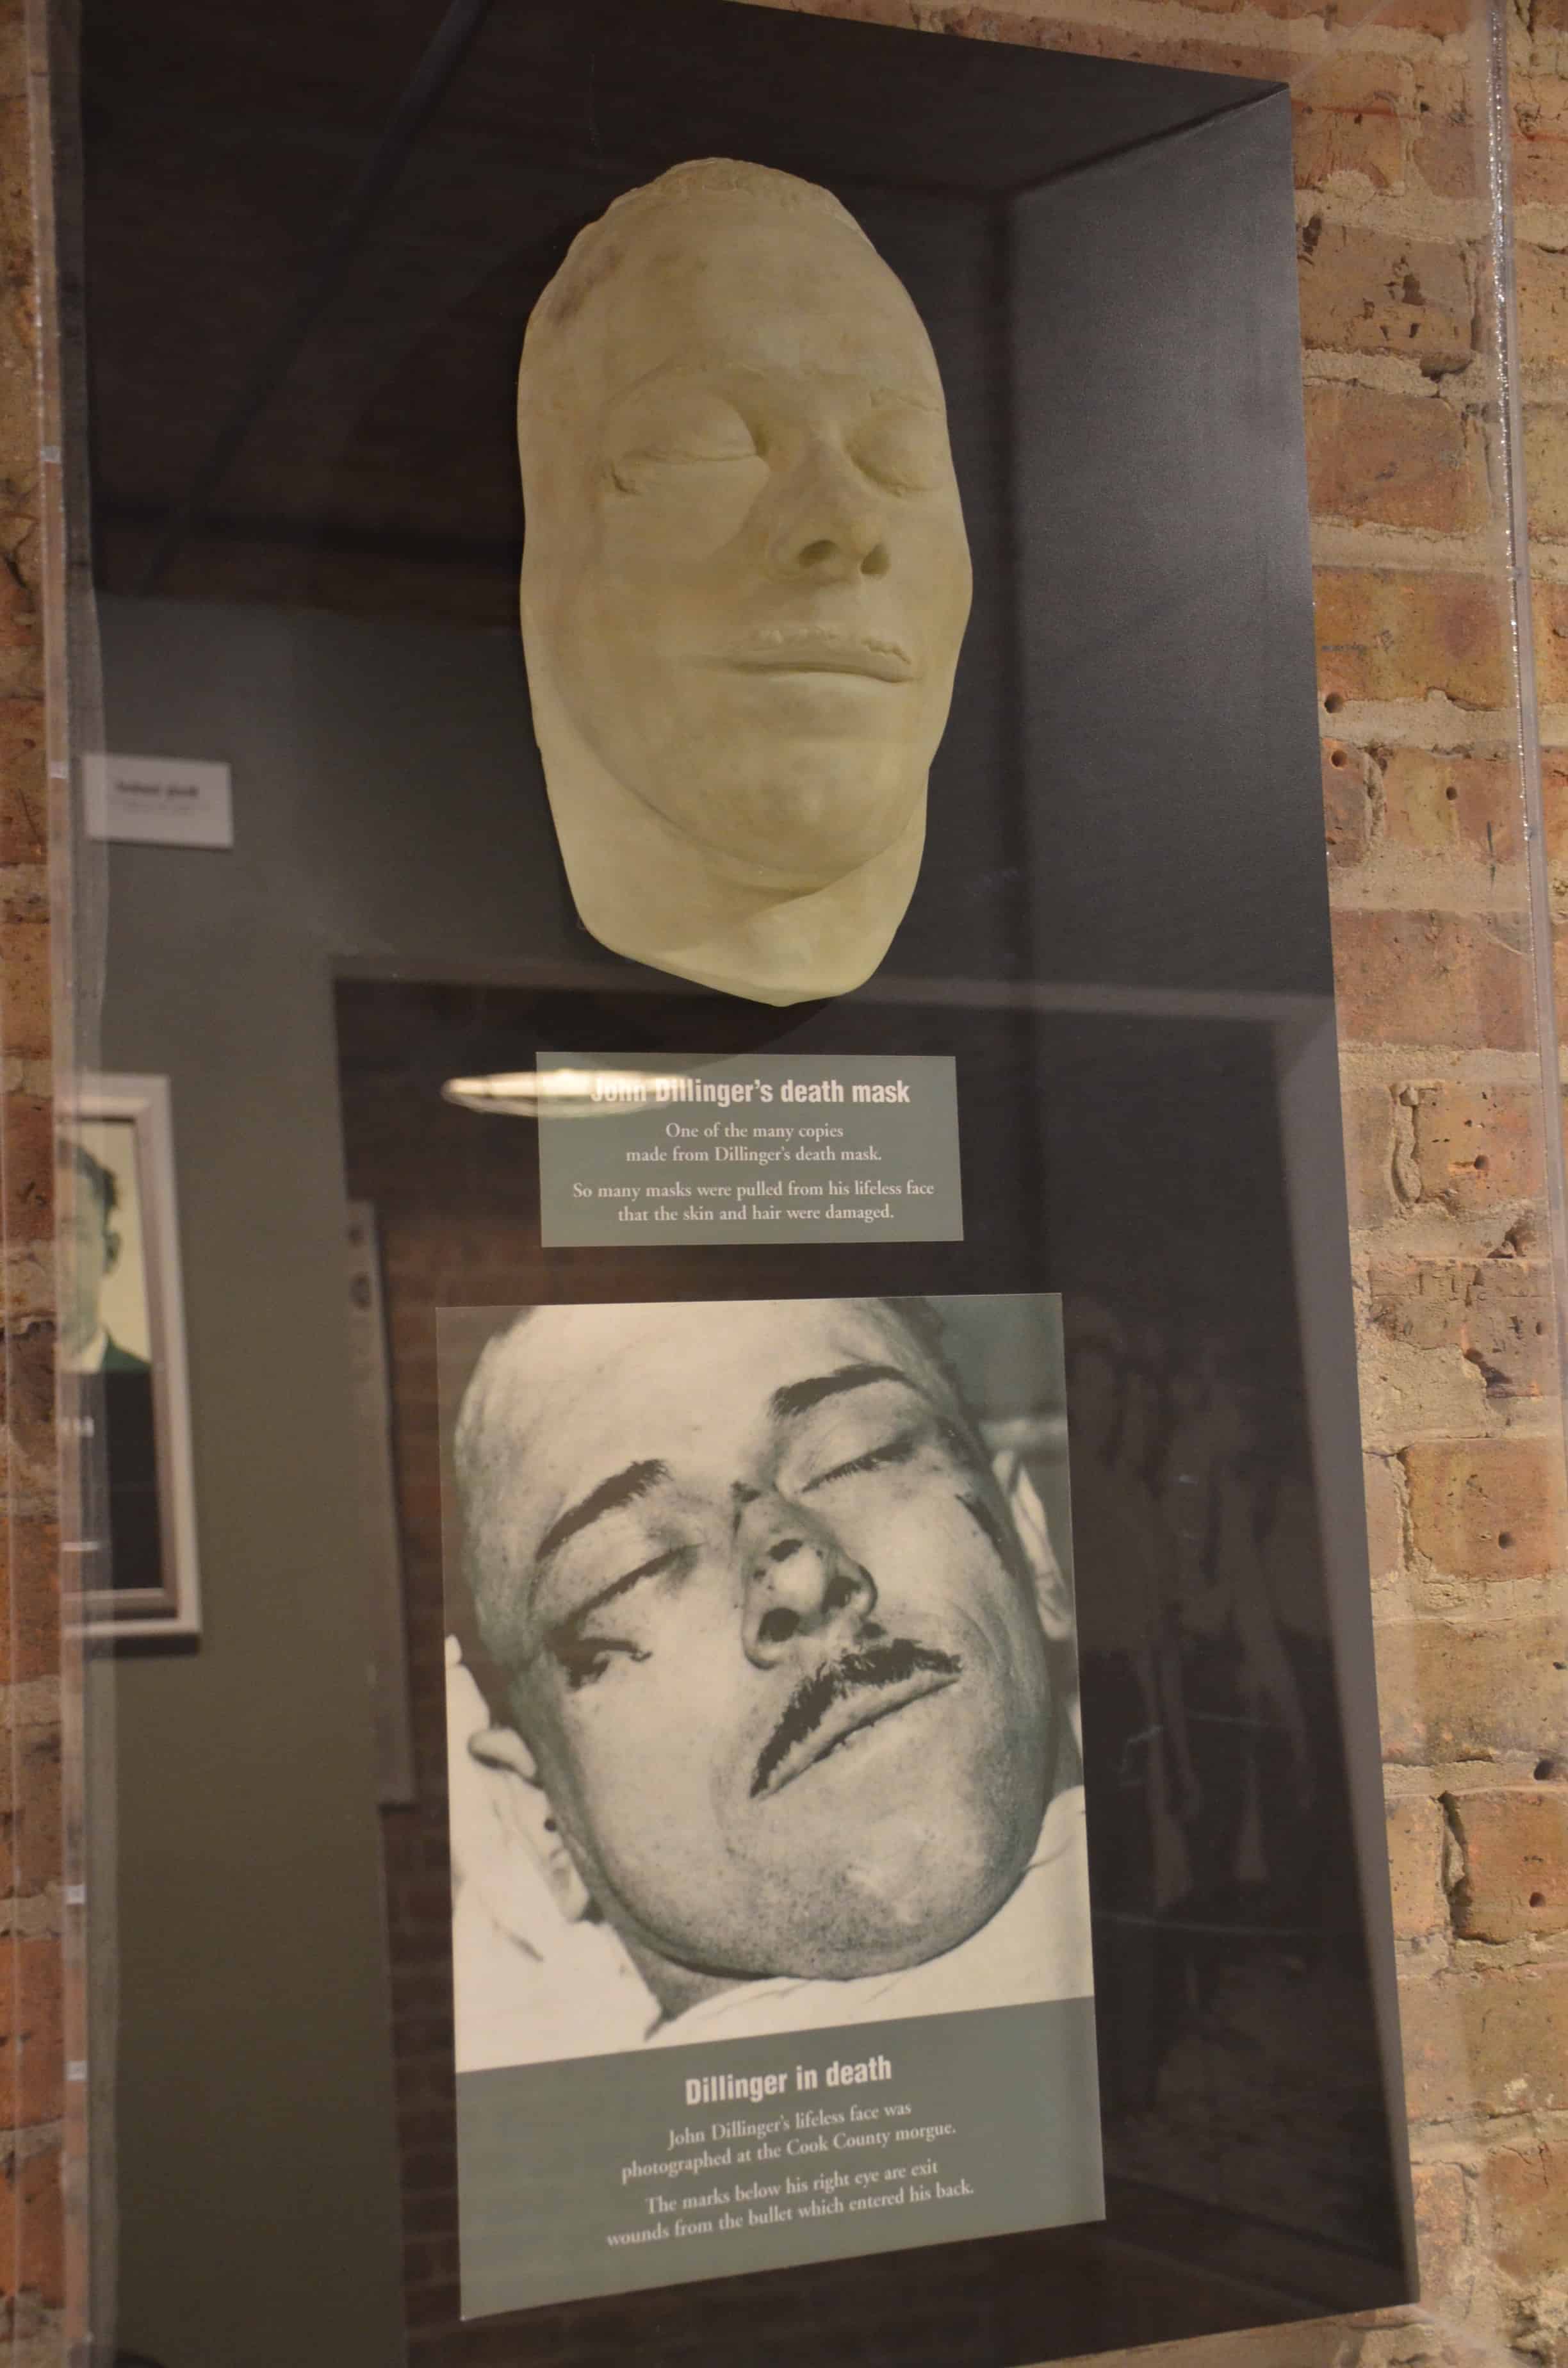 Dillinger's death mask at the John Dillinger Museum in Crown Point, Indiana